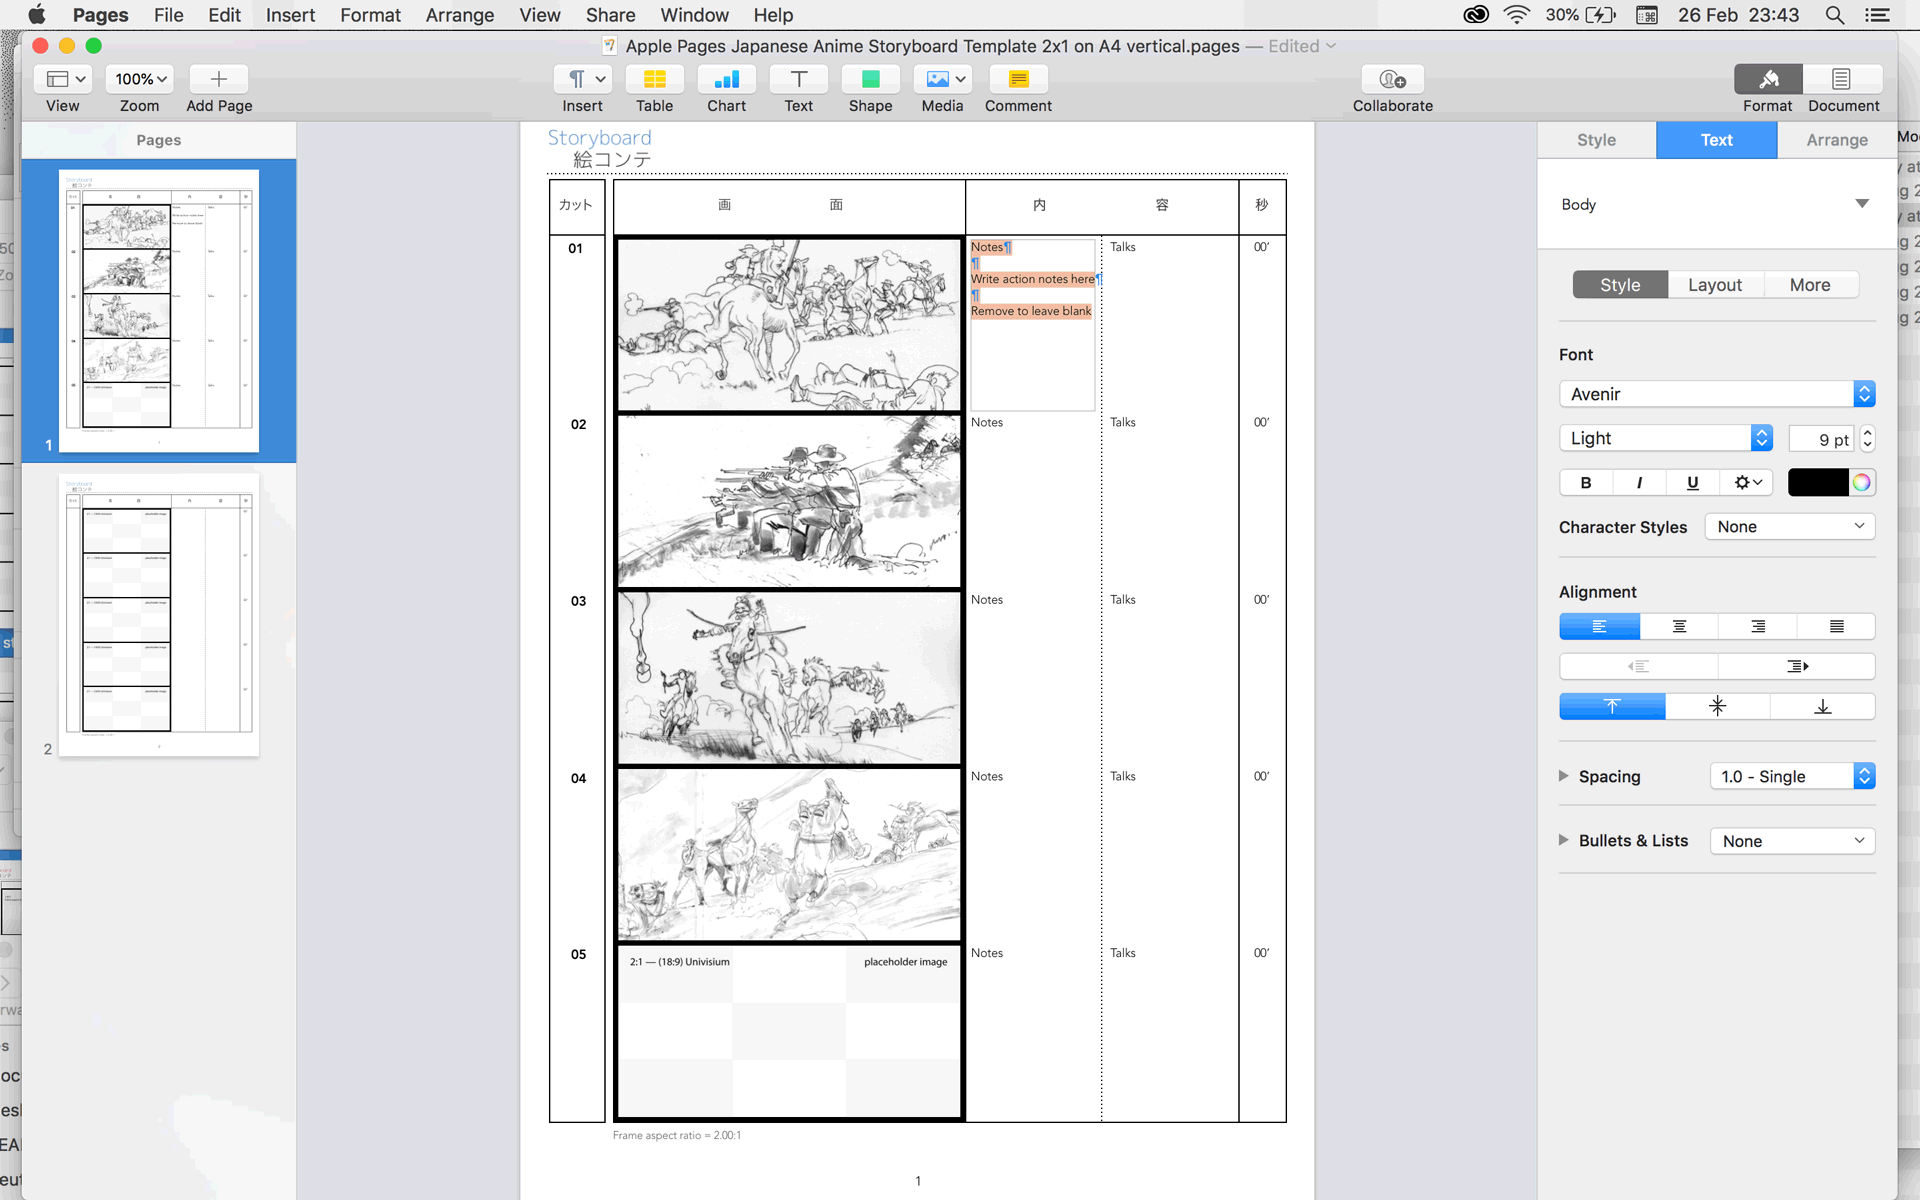 Apple Pages anime storyboard template for 2.00:1 2.00:1 aspect ratio films